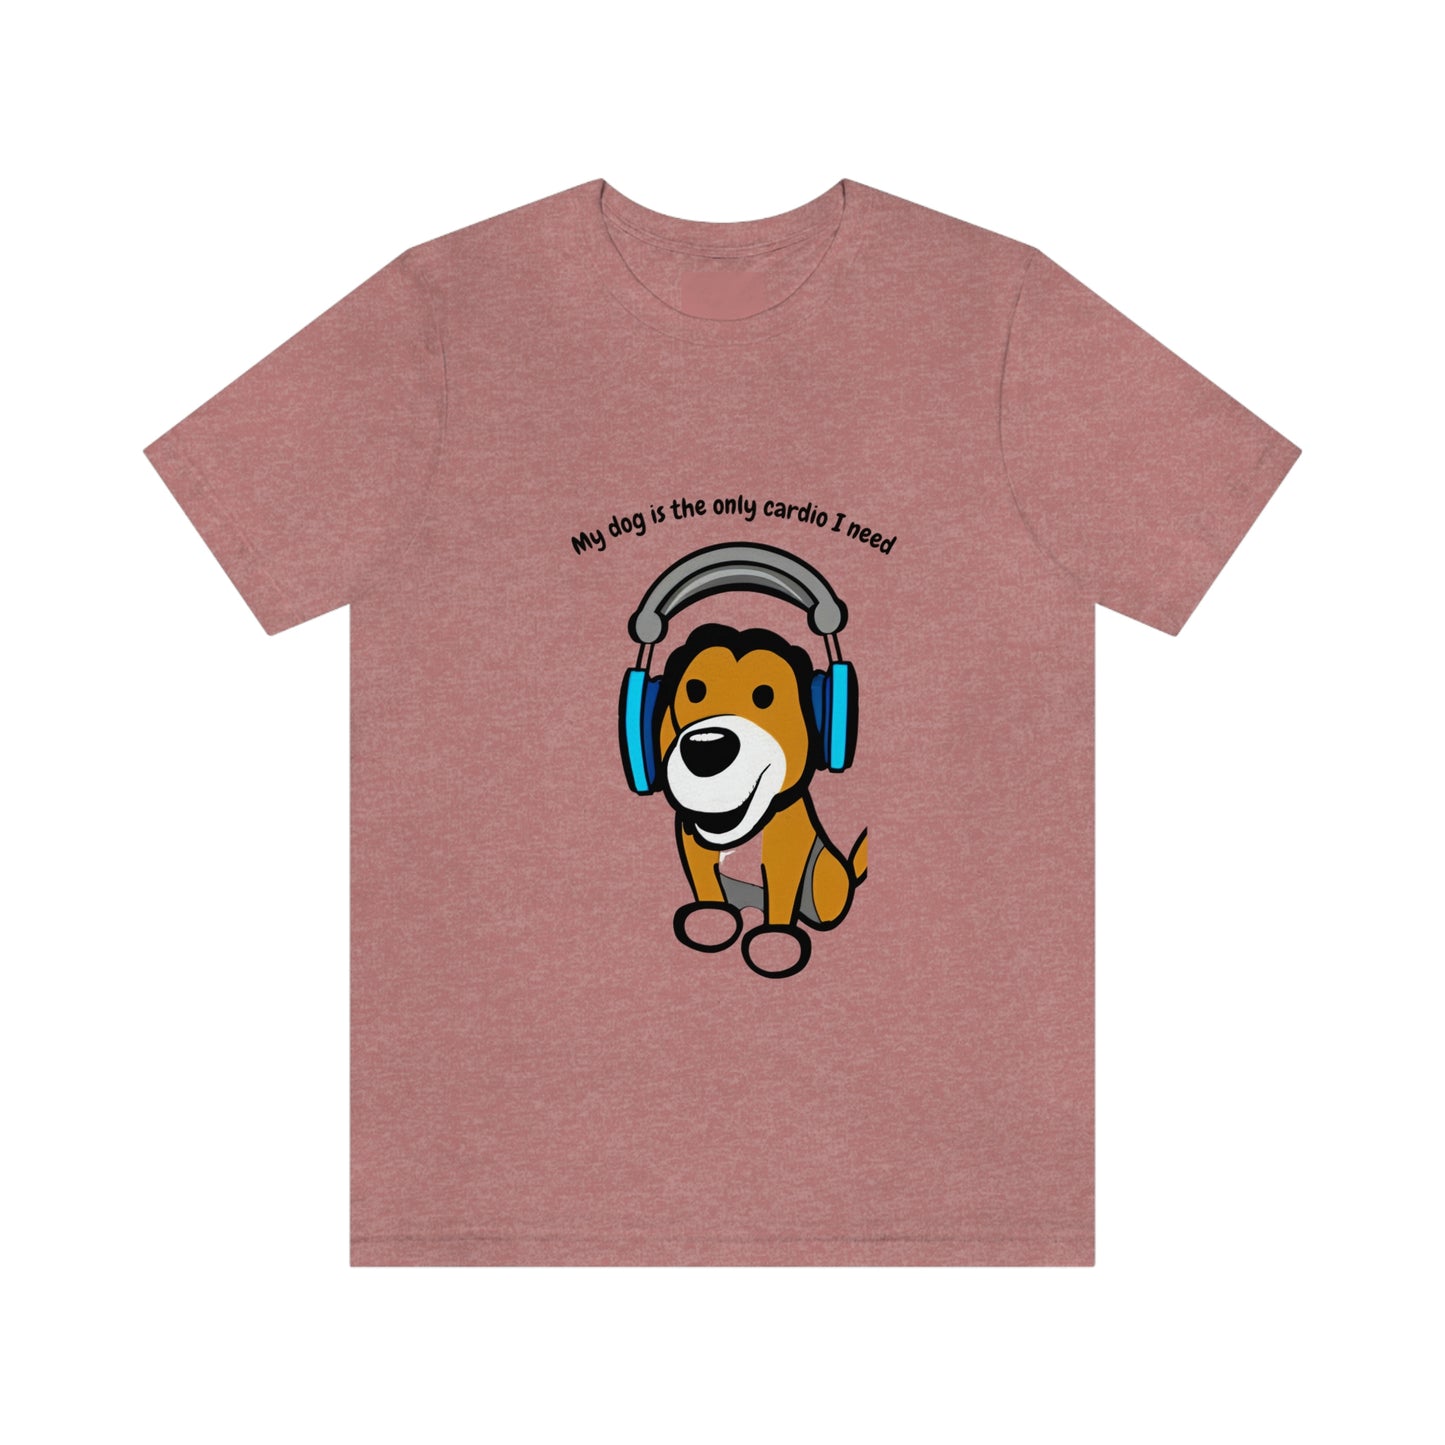 'My Dog Is The Only Cardio I Need' Premium Cotton Tee